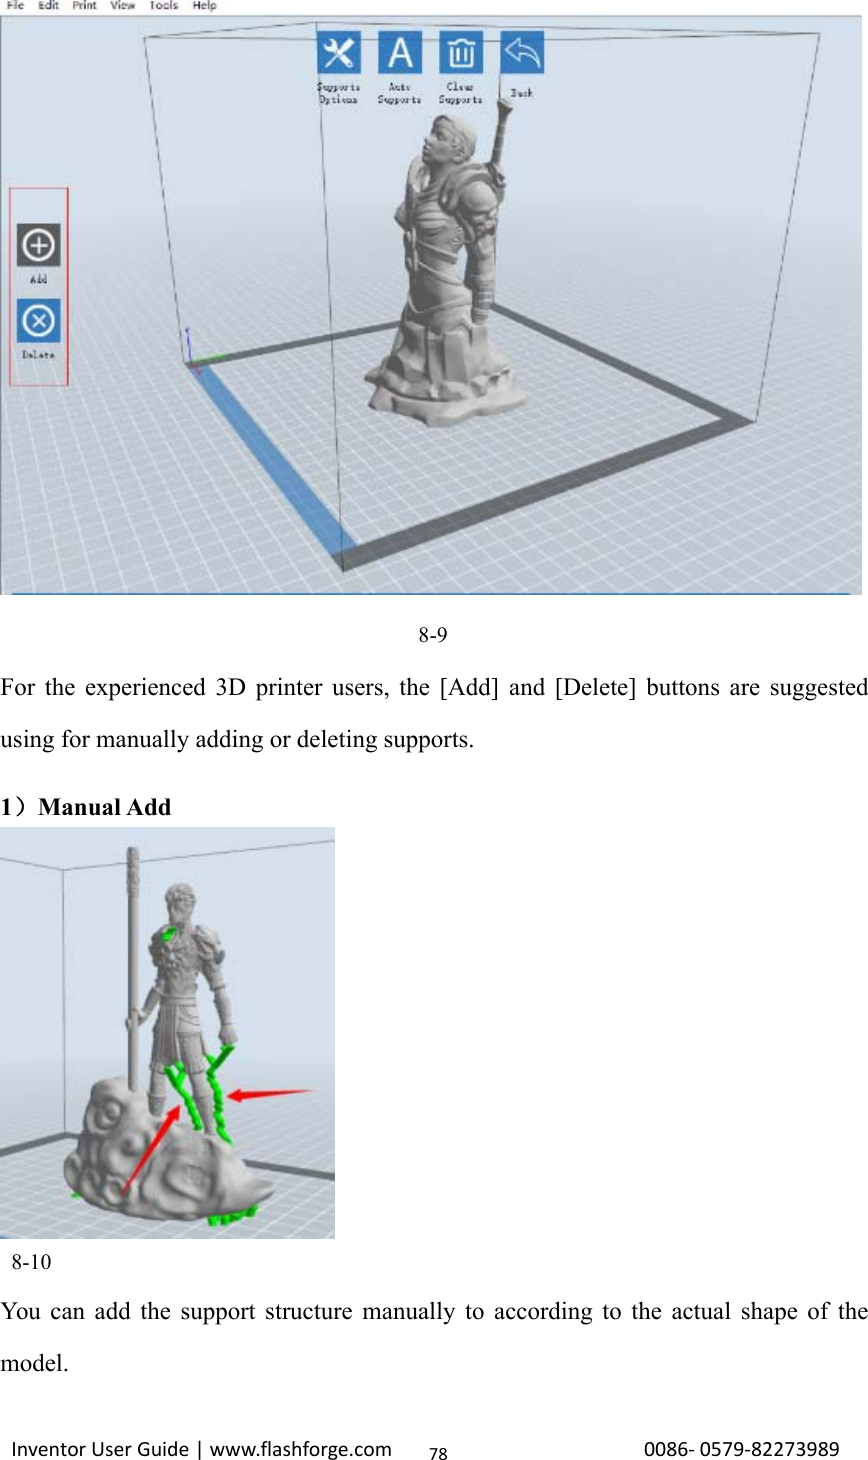 Inventor User Guide | www.flashforge.com 0086‐0579‐82273989788-9For the experienced 3D printer users, the [Add] and [Delete] buttons are suggestedusing for manually adding or deleting supports.1）Manual Add8-10You can add the support structure manually to according to the actual shape of themodel.